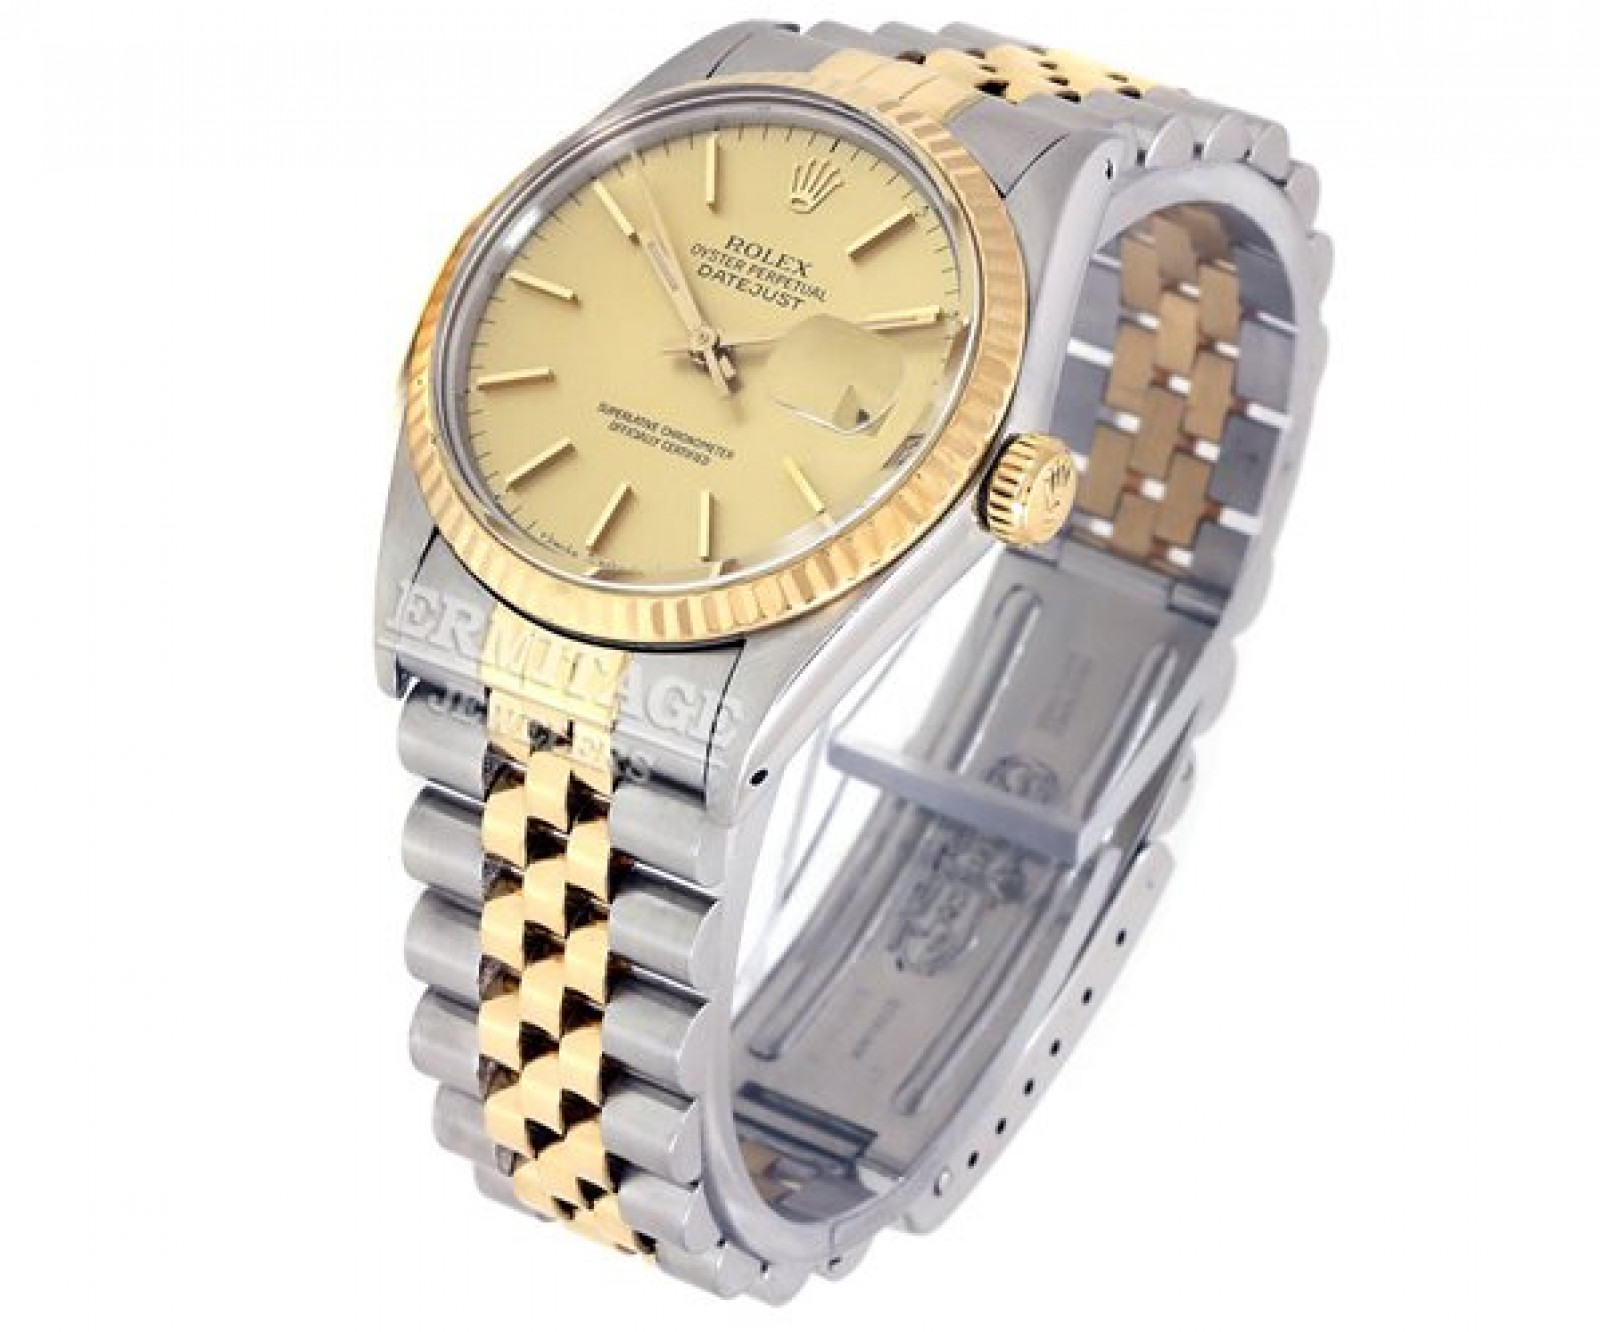 Rolex Datejust 16013 Gold & Steel With Champagne Dial